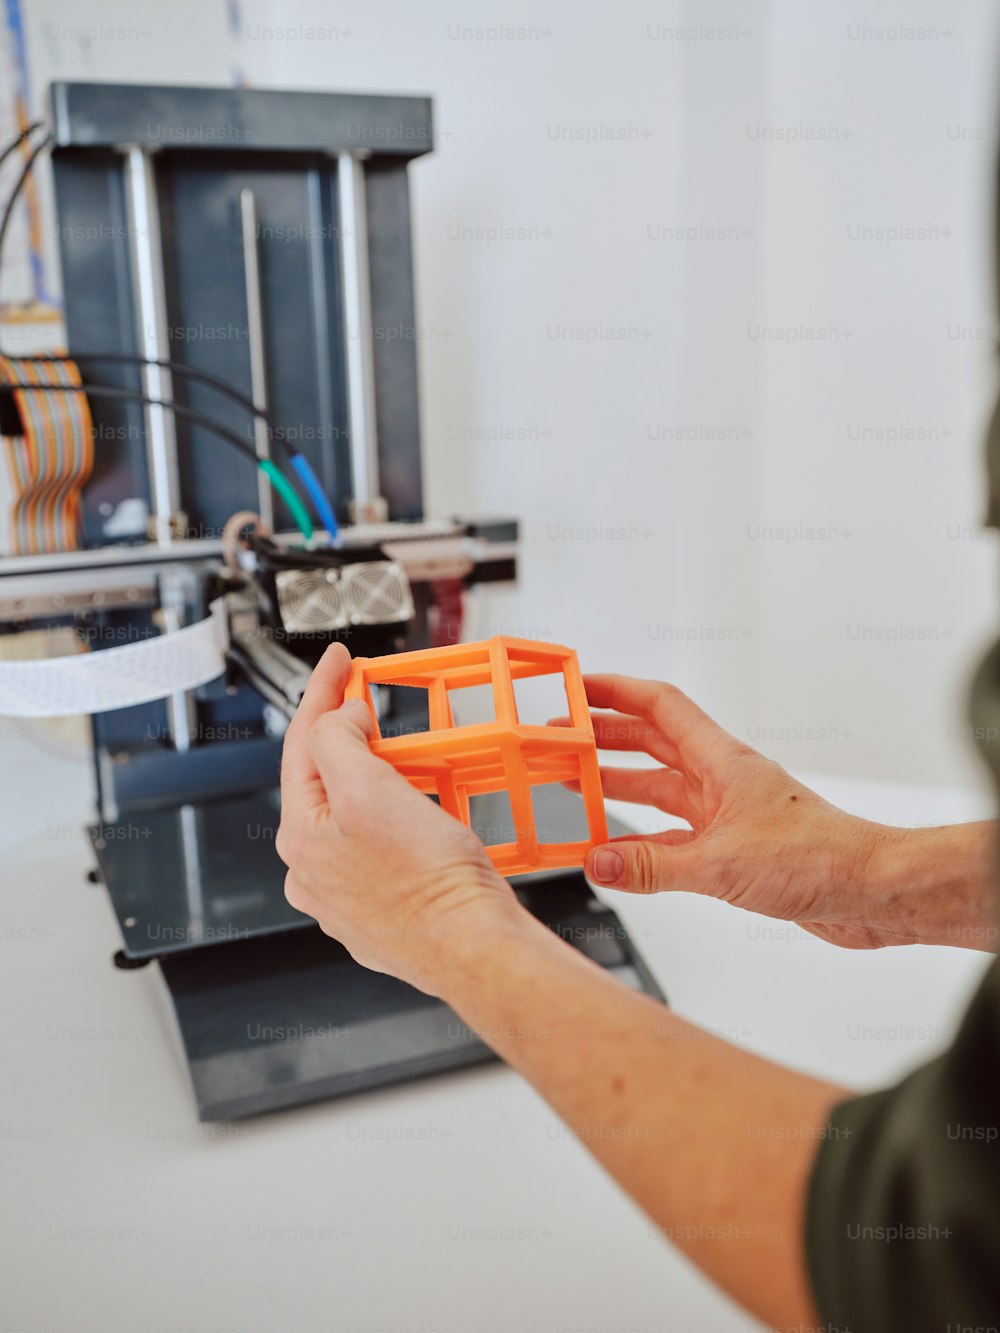 a person is working on a 3d printer